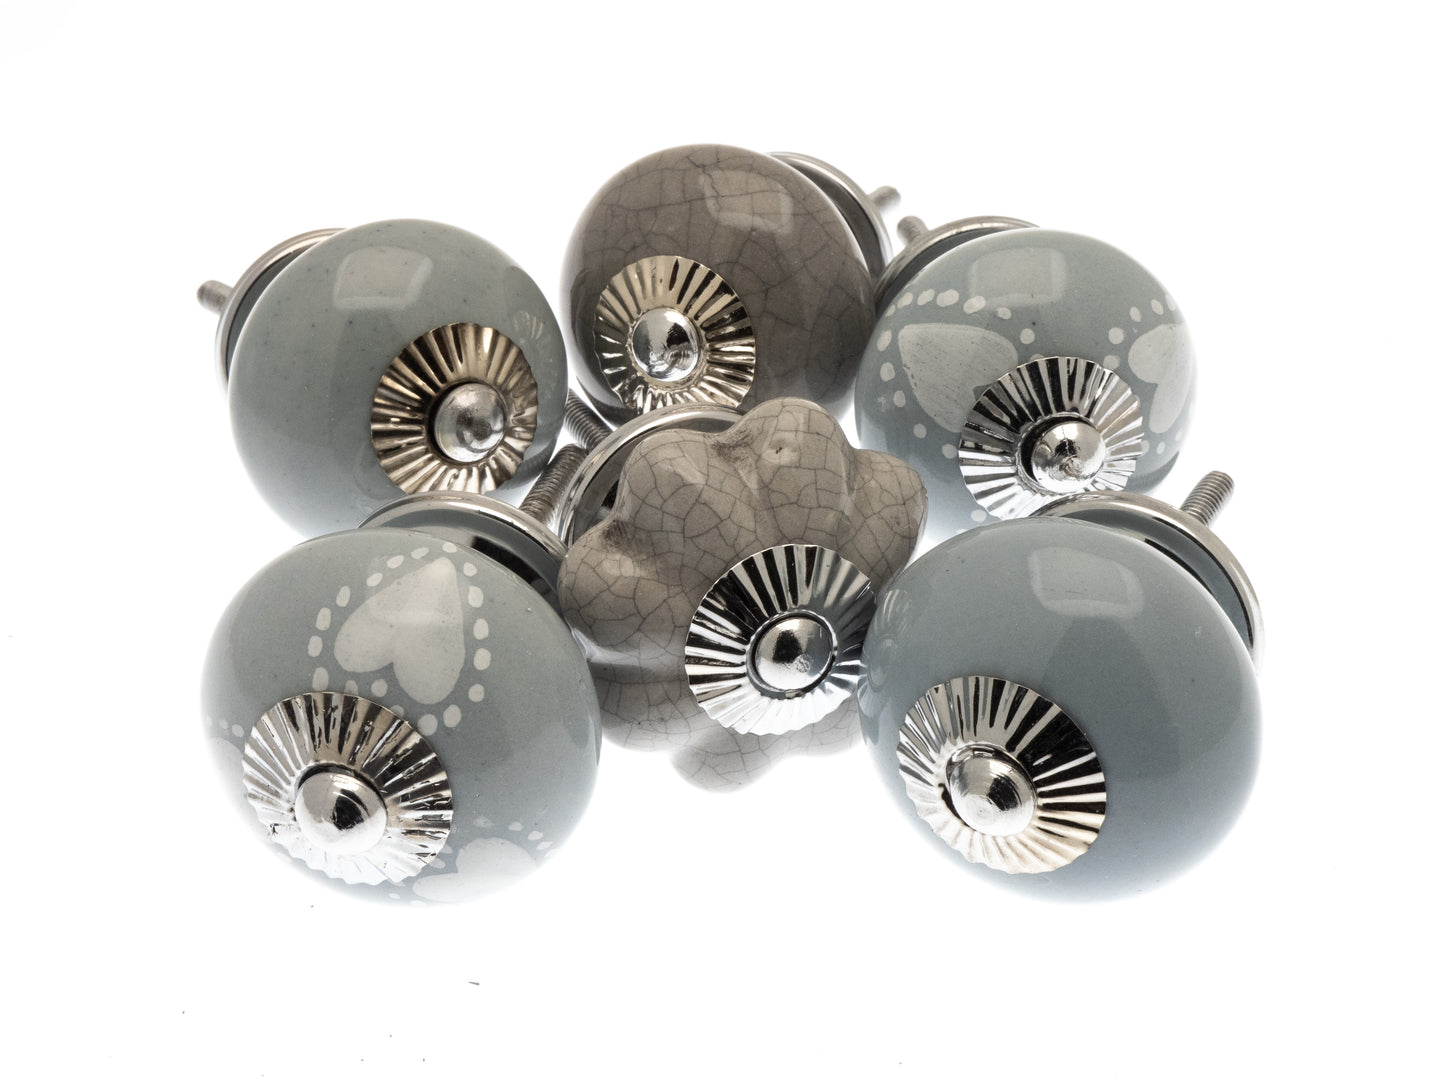 Ceramic Cupboard Door Knobs Whisper Grey in hearts, crackle and plain grey - Set of 6